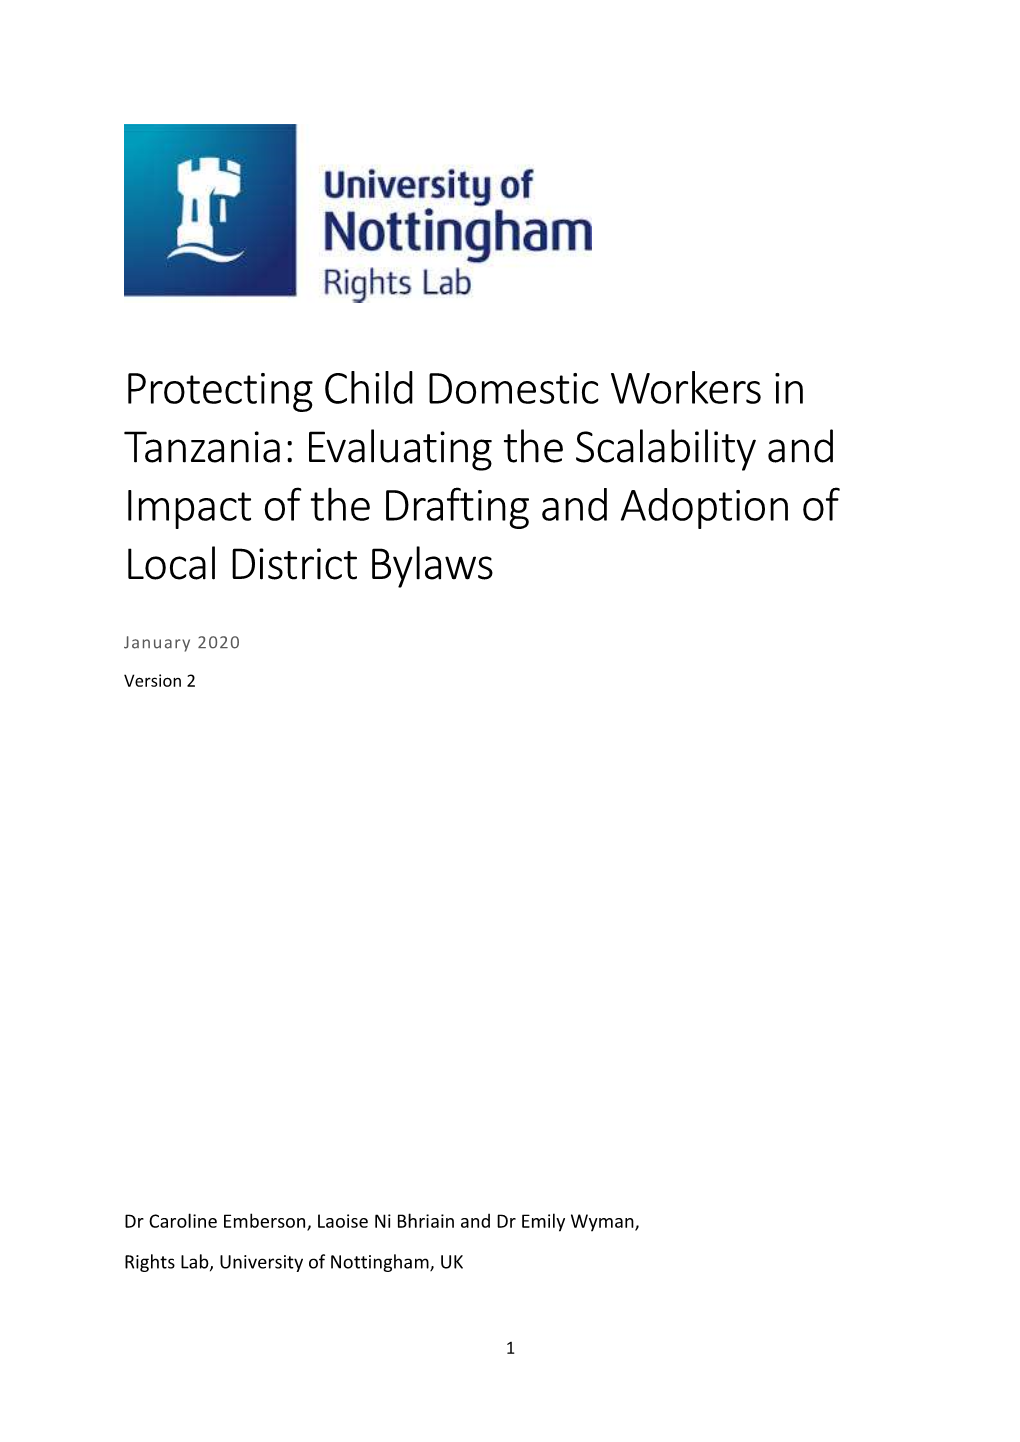 Protecting Child Domestic Workers in Tanzania: Evaluating the Scalability and Impact of the Drafting and Adoption of Local District Bylaws